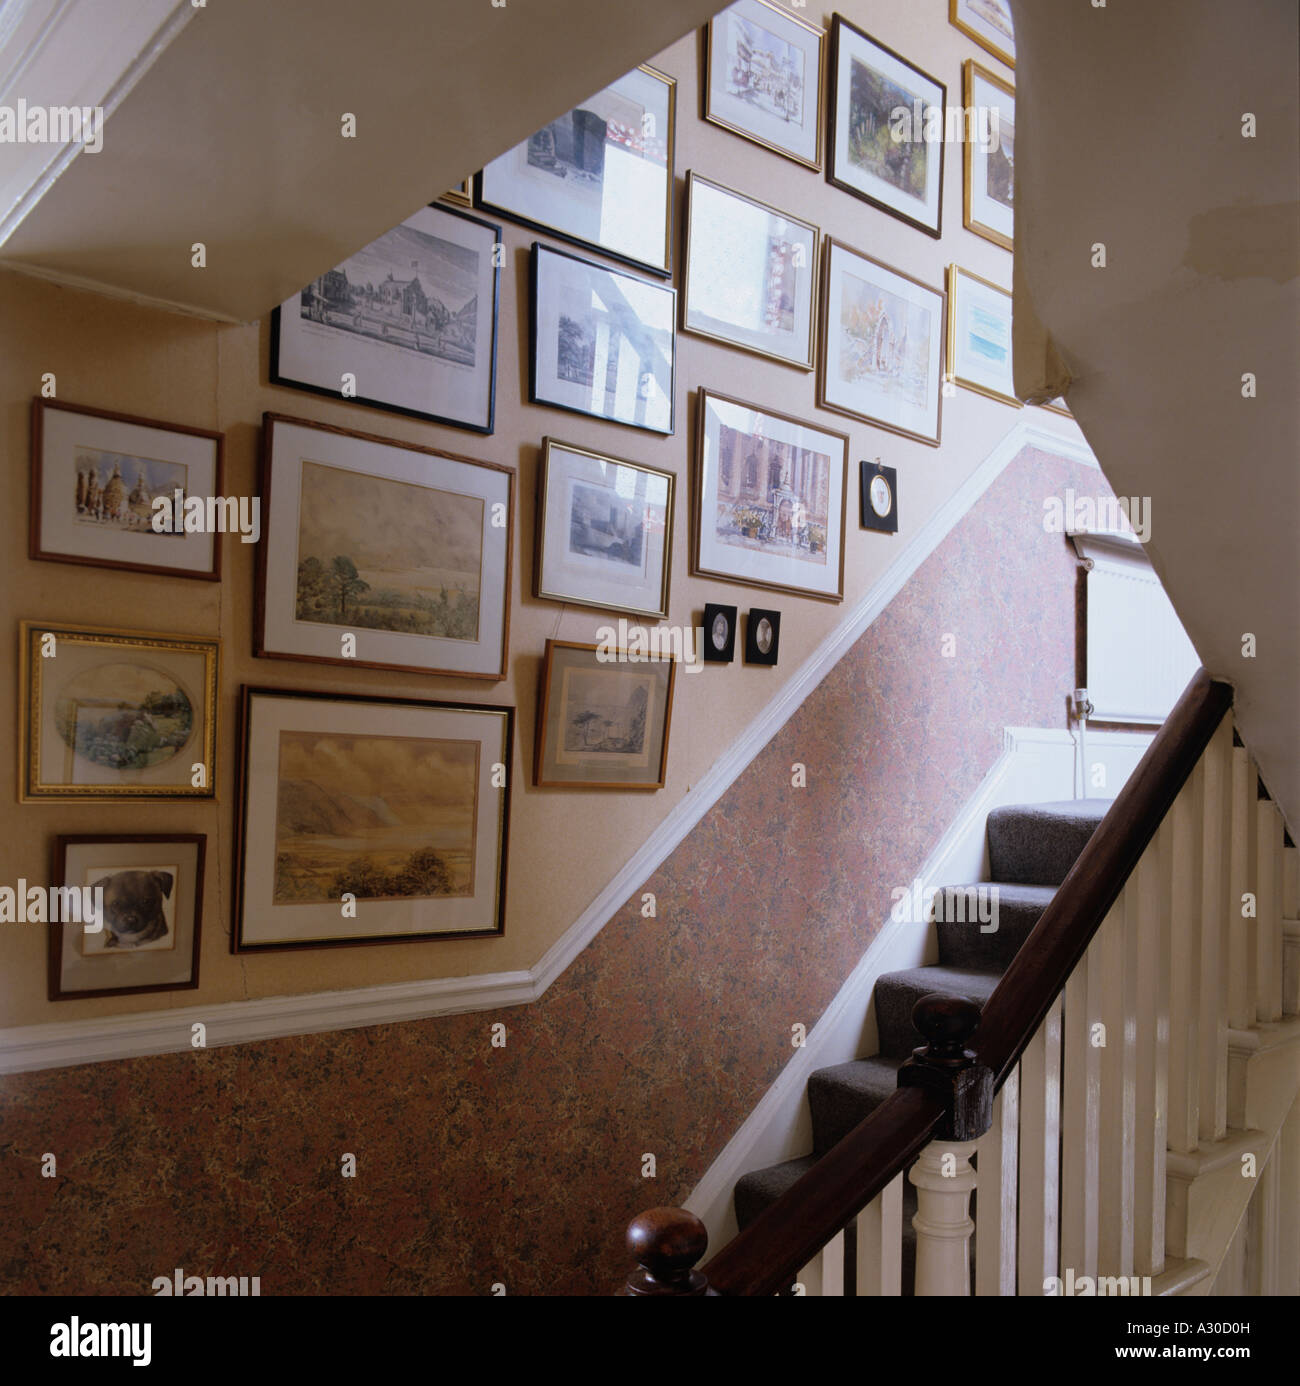 Staircase and wall of pictures and artwork Stock Photo